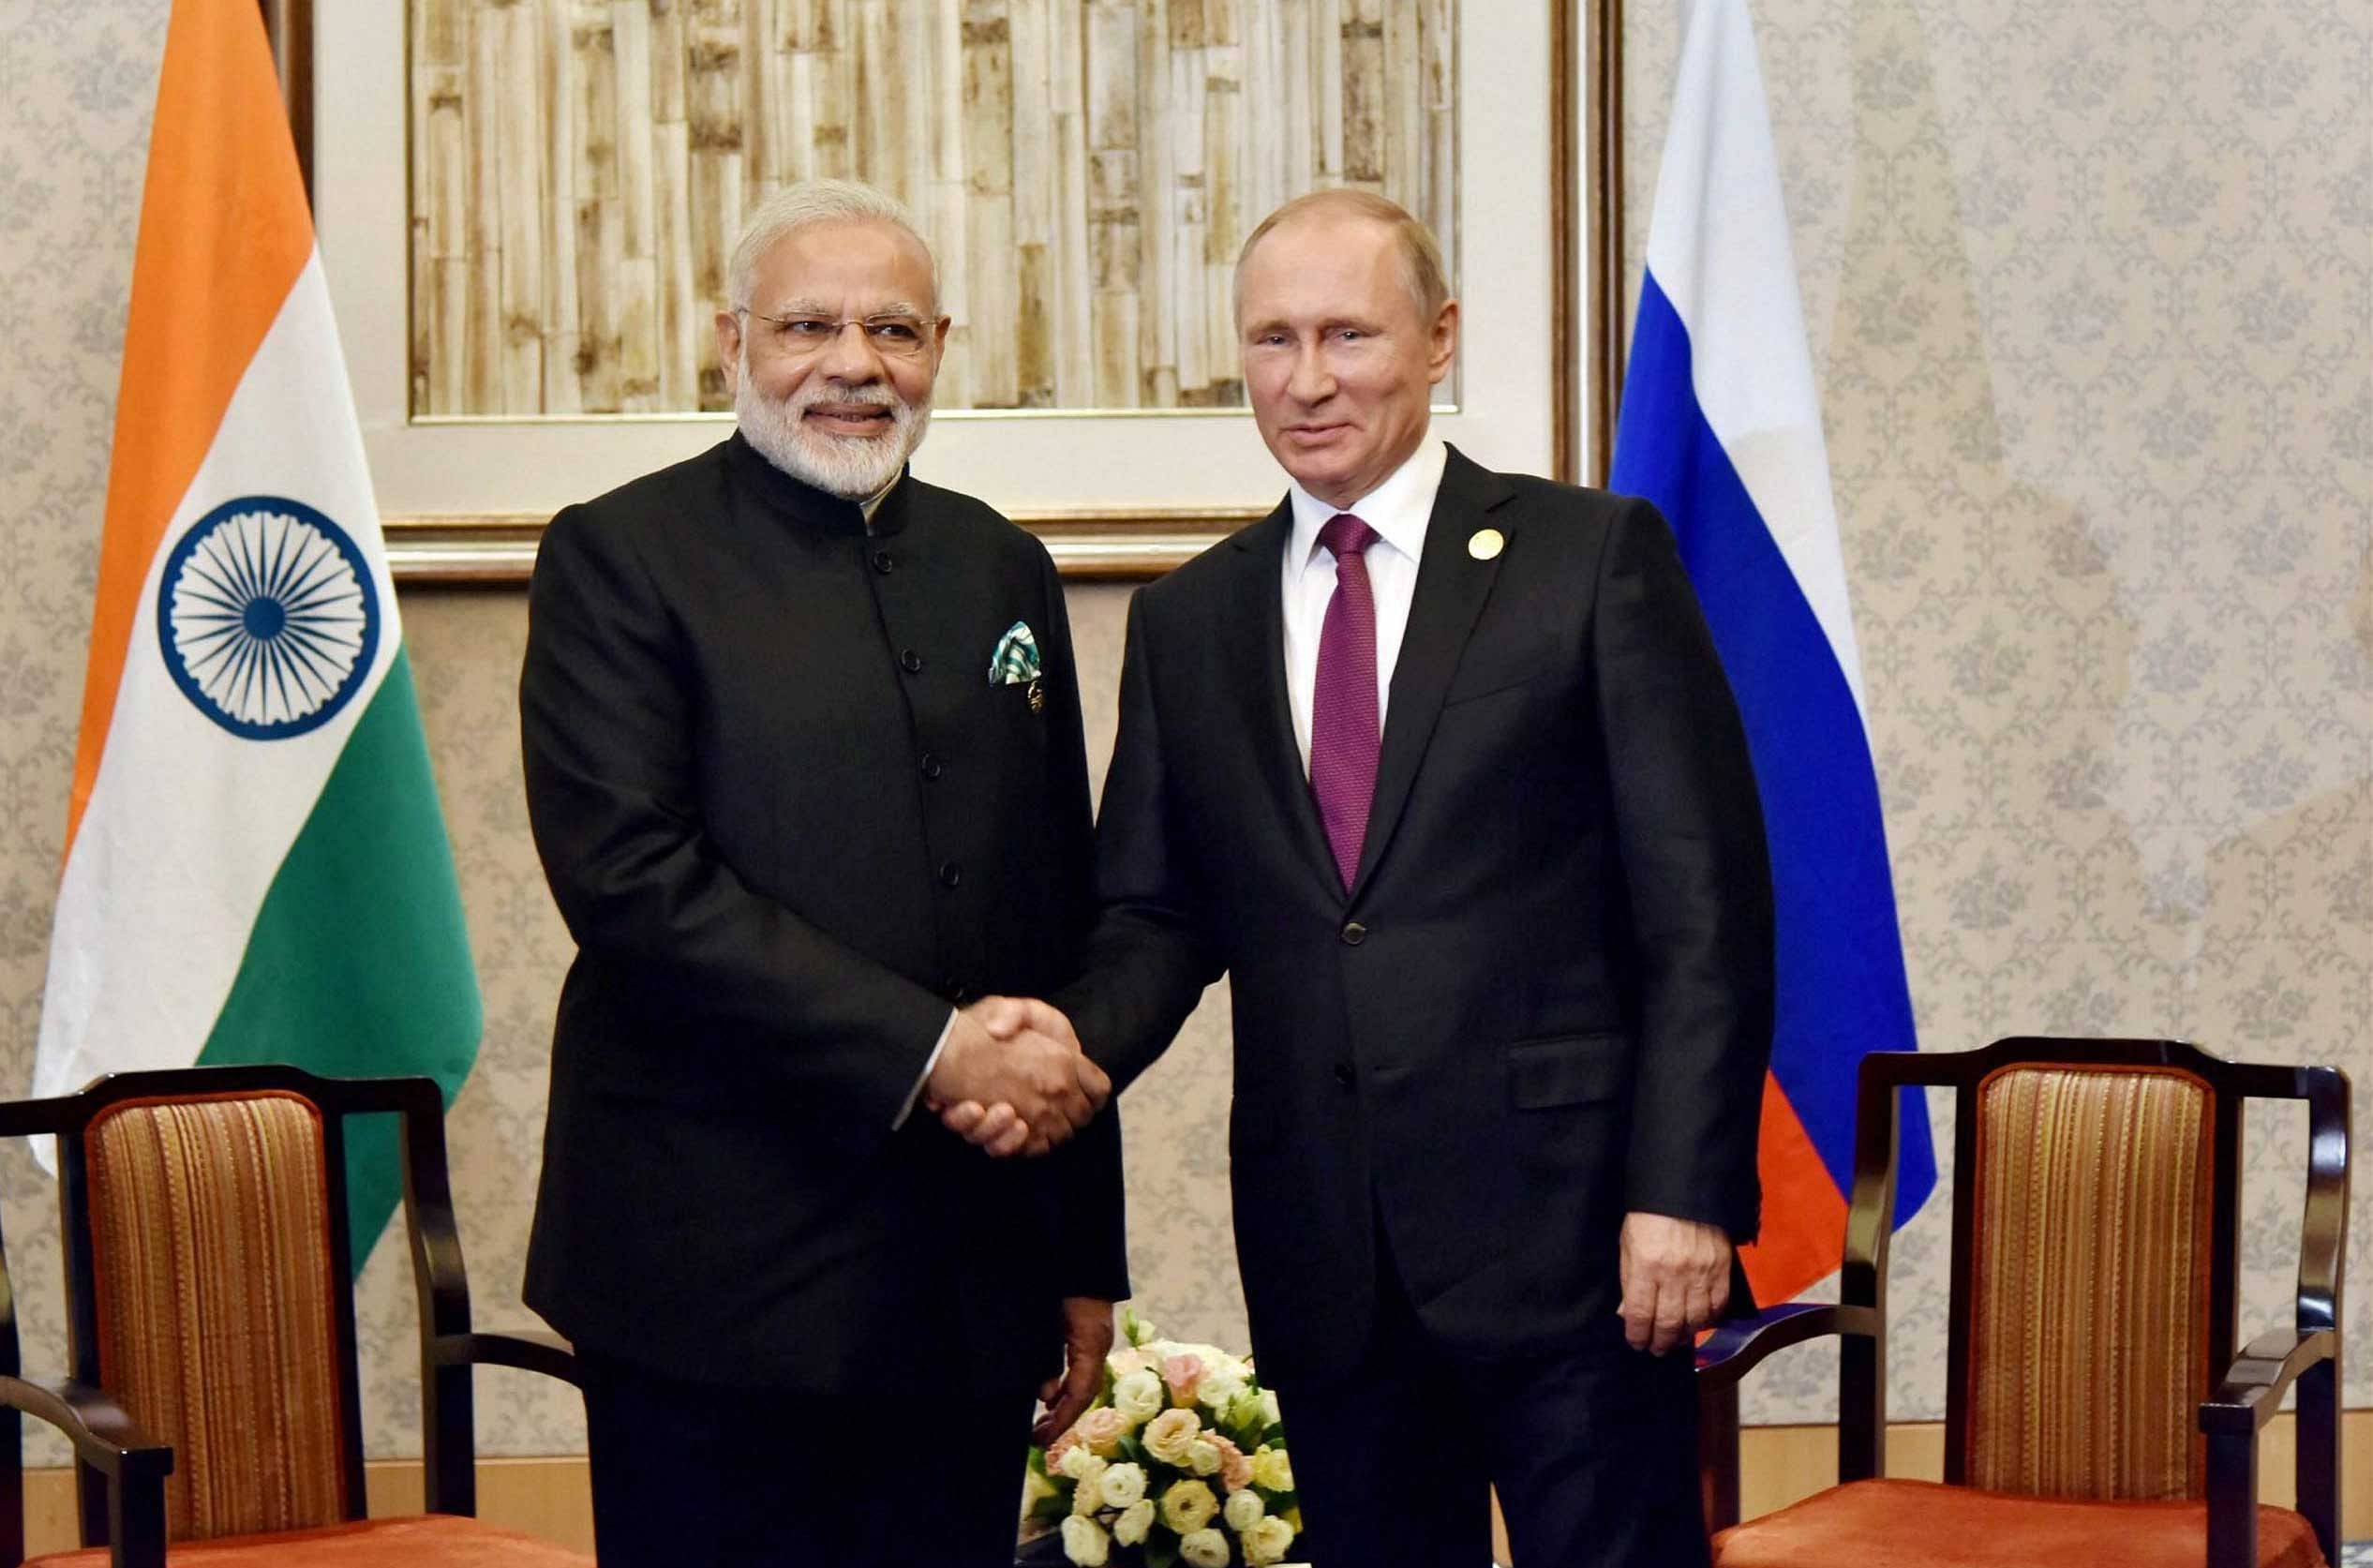 Modi will visit Vladivostok in Far Eastern Federal District of Russia from September 4 to 5 to attend the Eastern Economic Forum and to hold the annual summit with Putin (PTI File Photo)